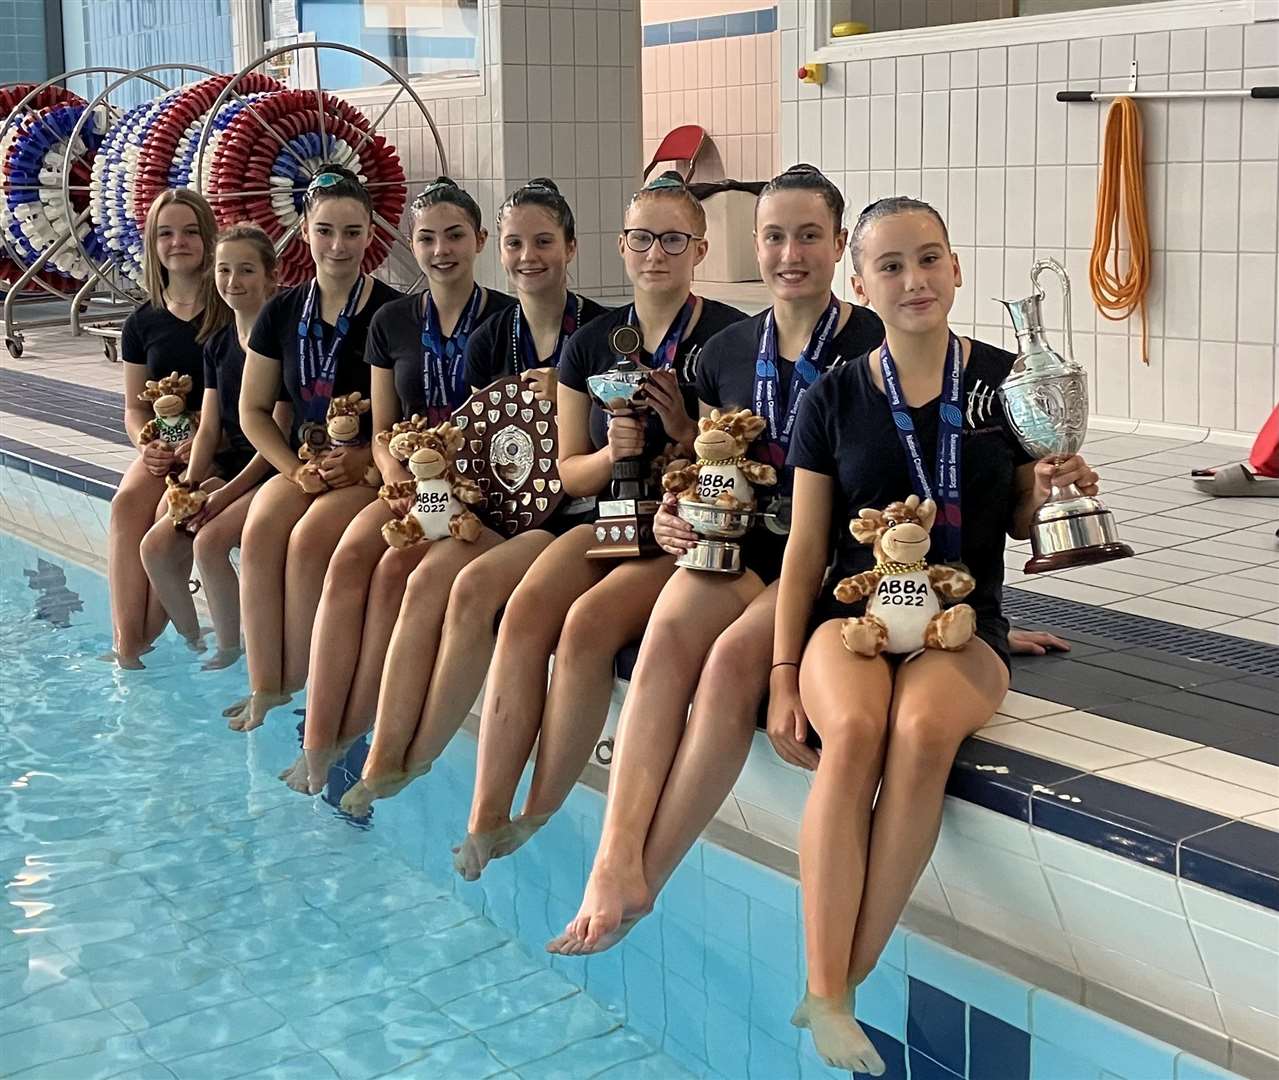 Nairn Synchro swimmers celebrate their success.